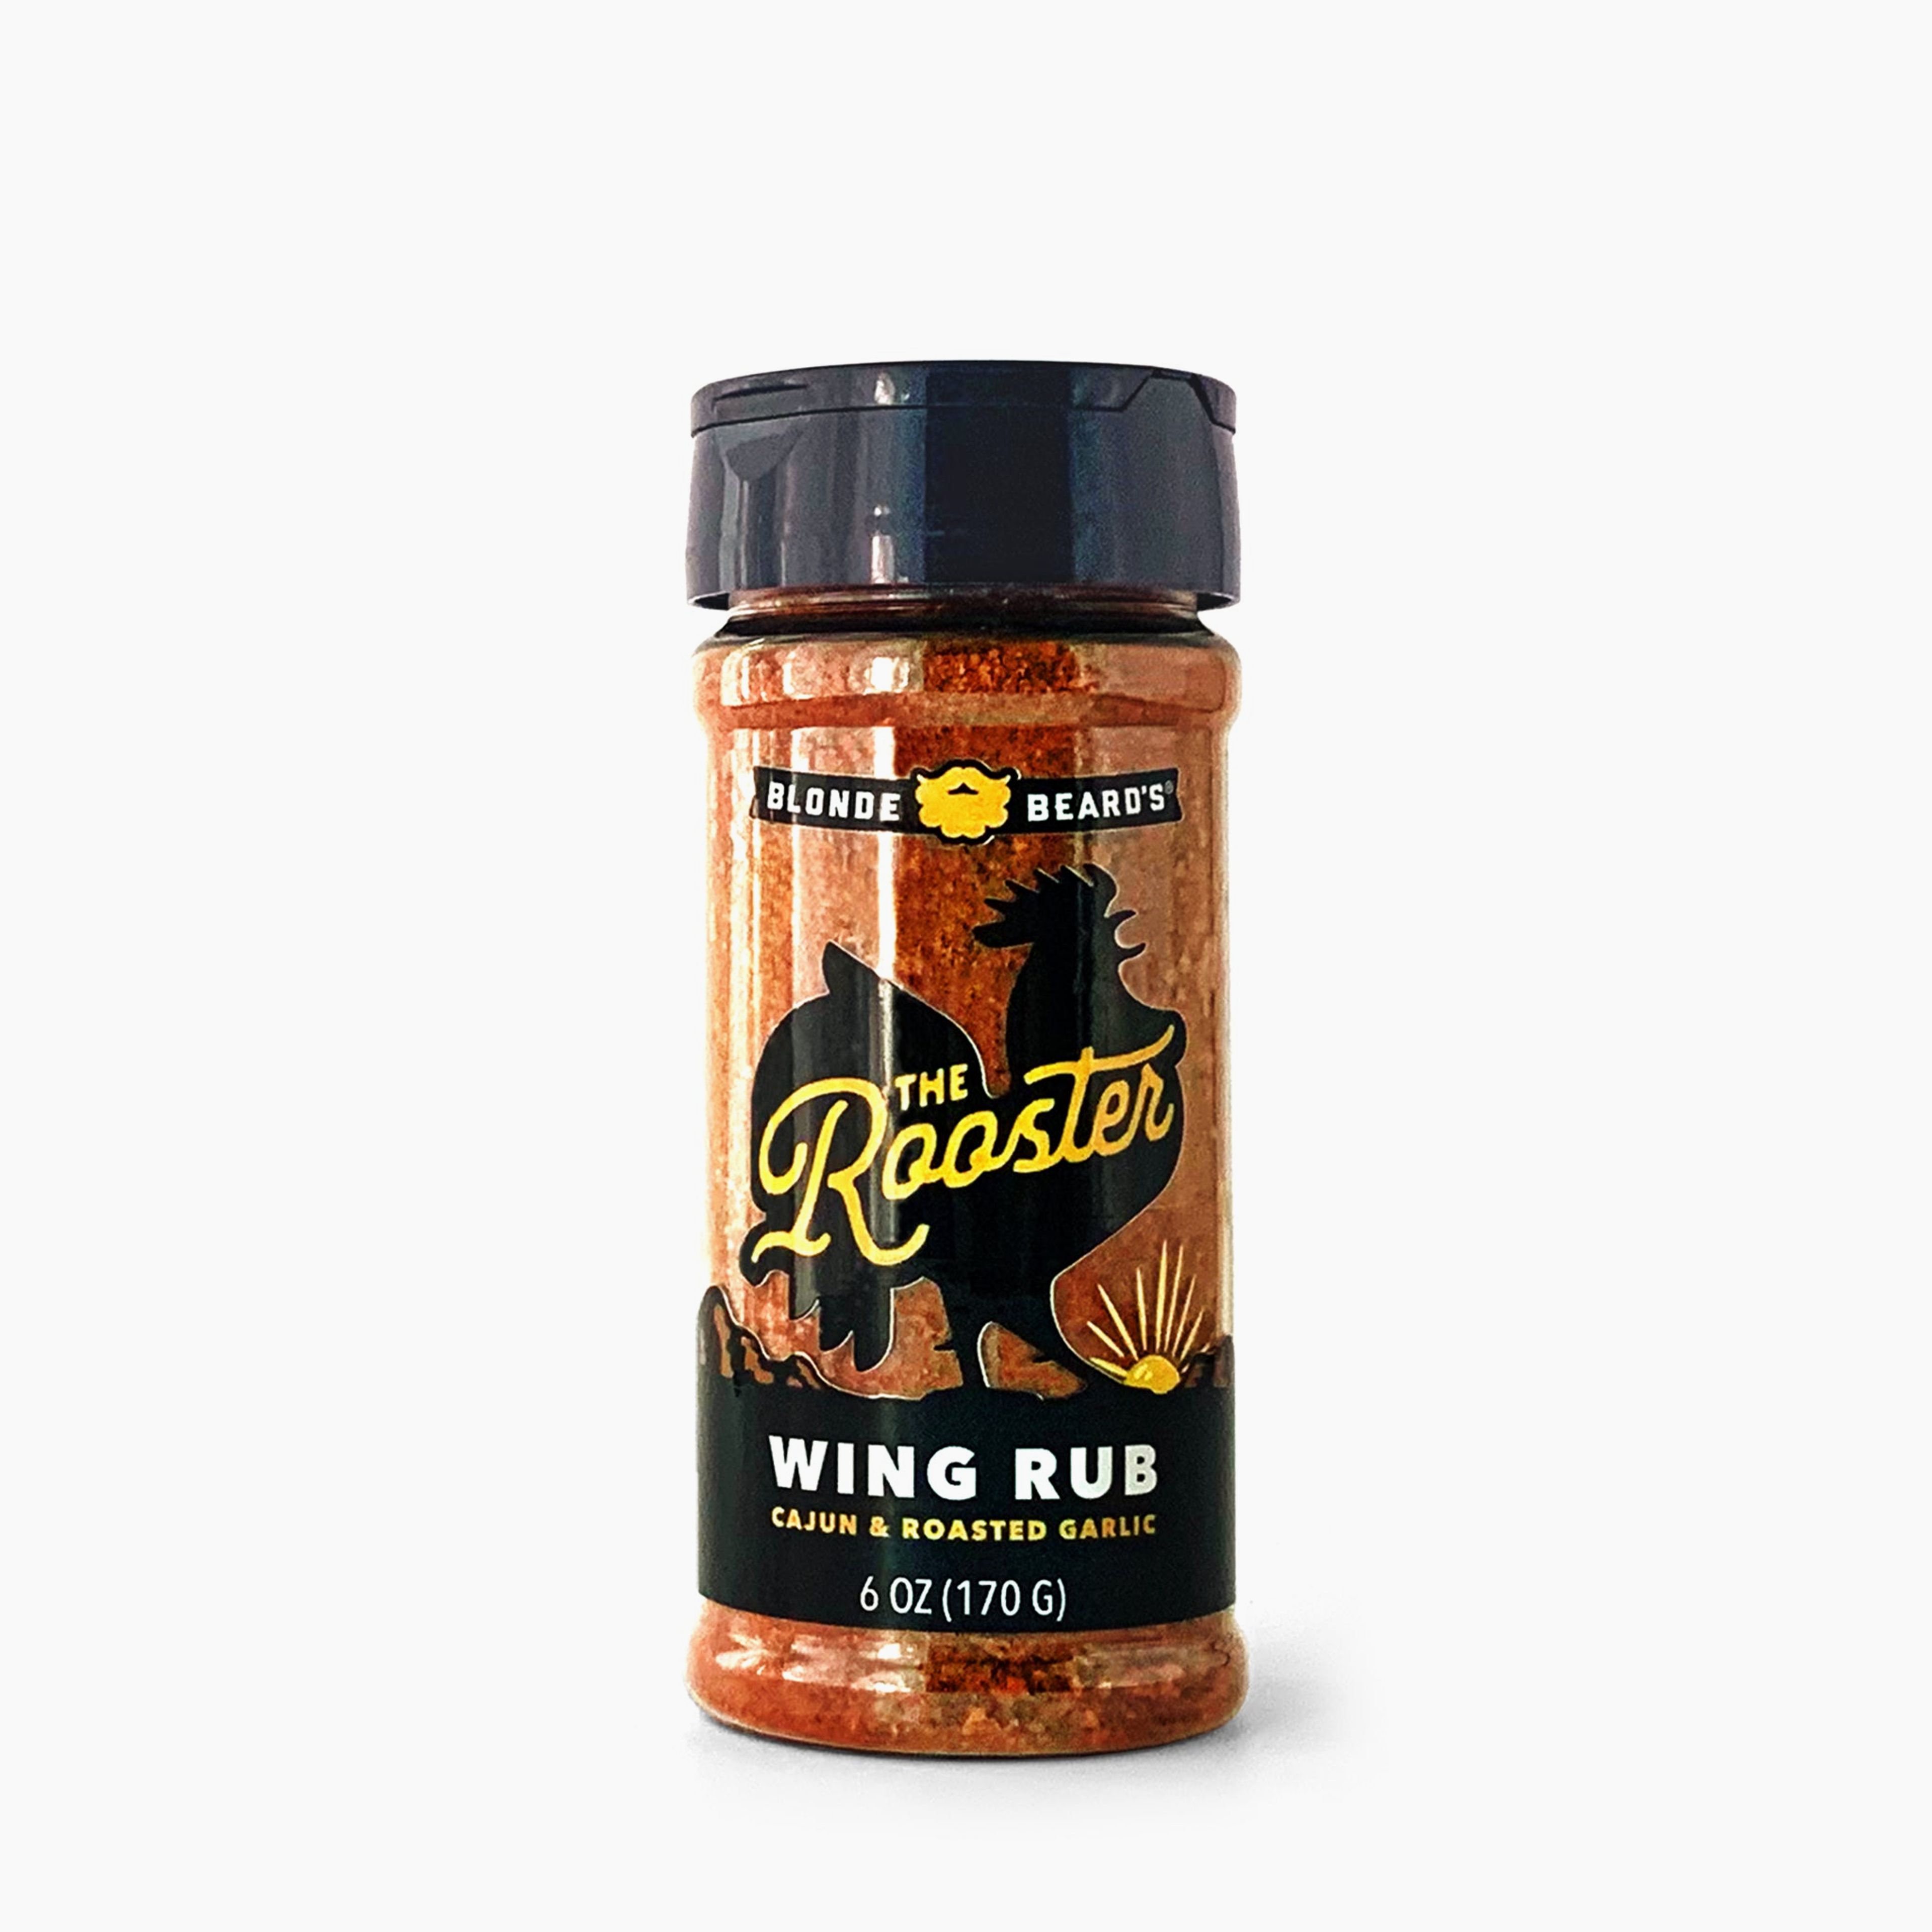 The Rooster Wing Rub